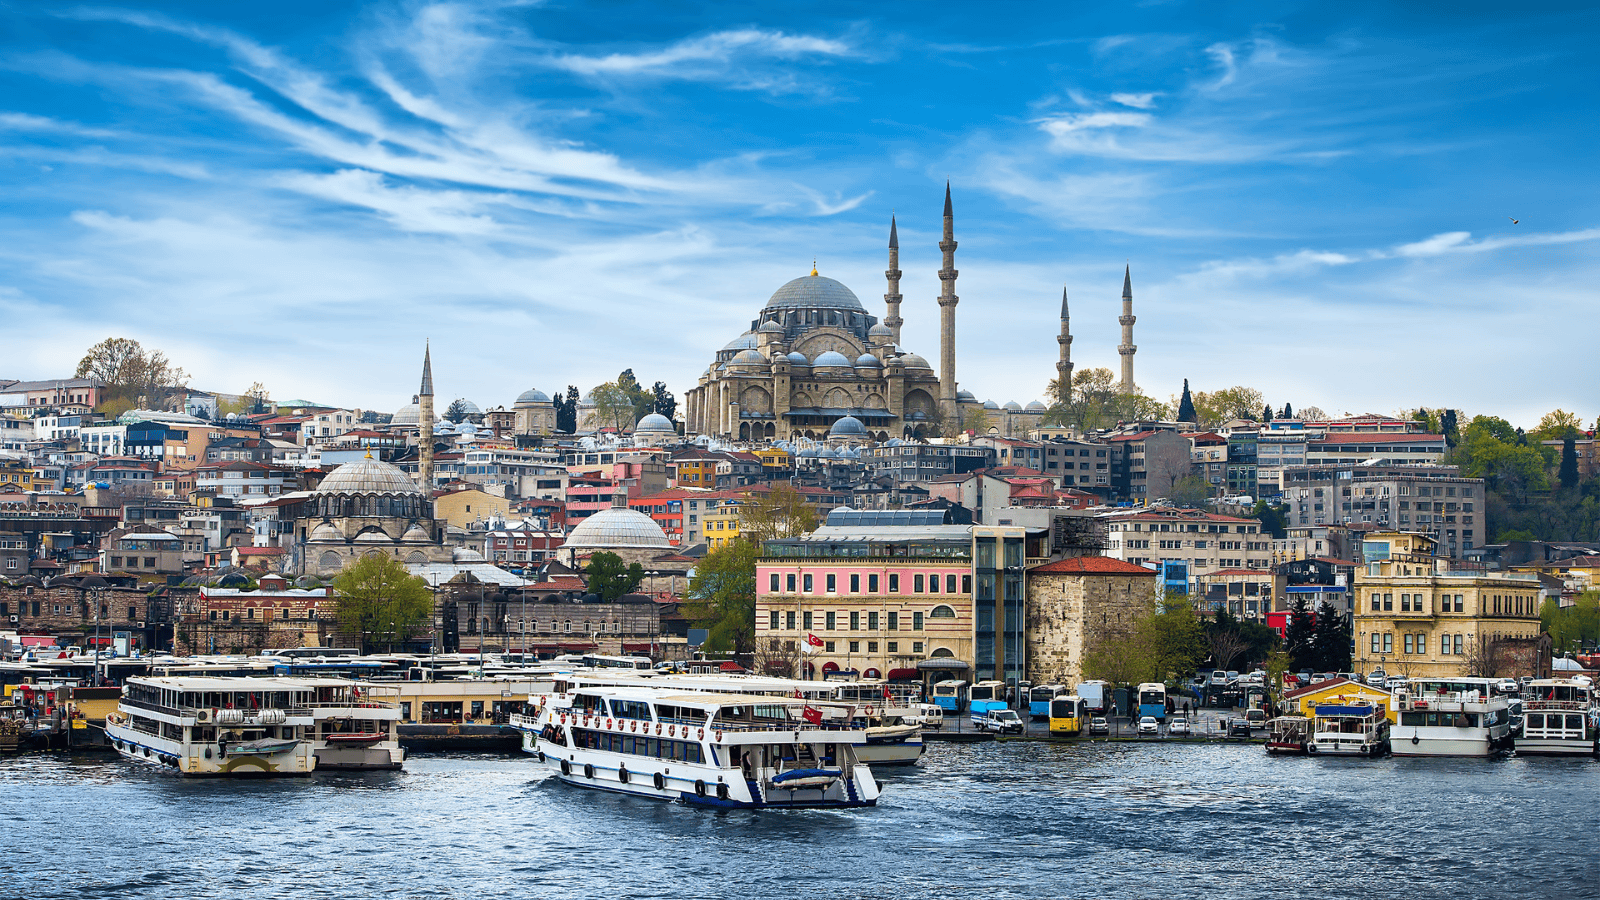 <p>Though Istanbul and Dubai vary in some aspects, they share many alluring characteristics. Both have historic monuments and boast a distinct blend of global influences.</p><p>While Istanbul dates back to the 7th century, the present-day cityscape retains its ancient charm. Modern amenities are available throughout this relatively <a href="https://whatthefab.com/cheap-european-cities.html" rel="follow">cheap European city</a>, which is easier on the wallet than Dubai.</p>